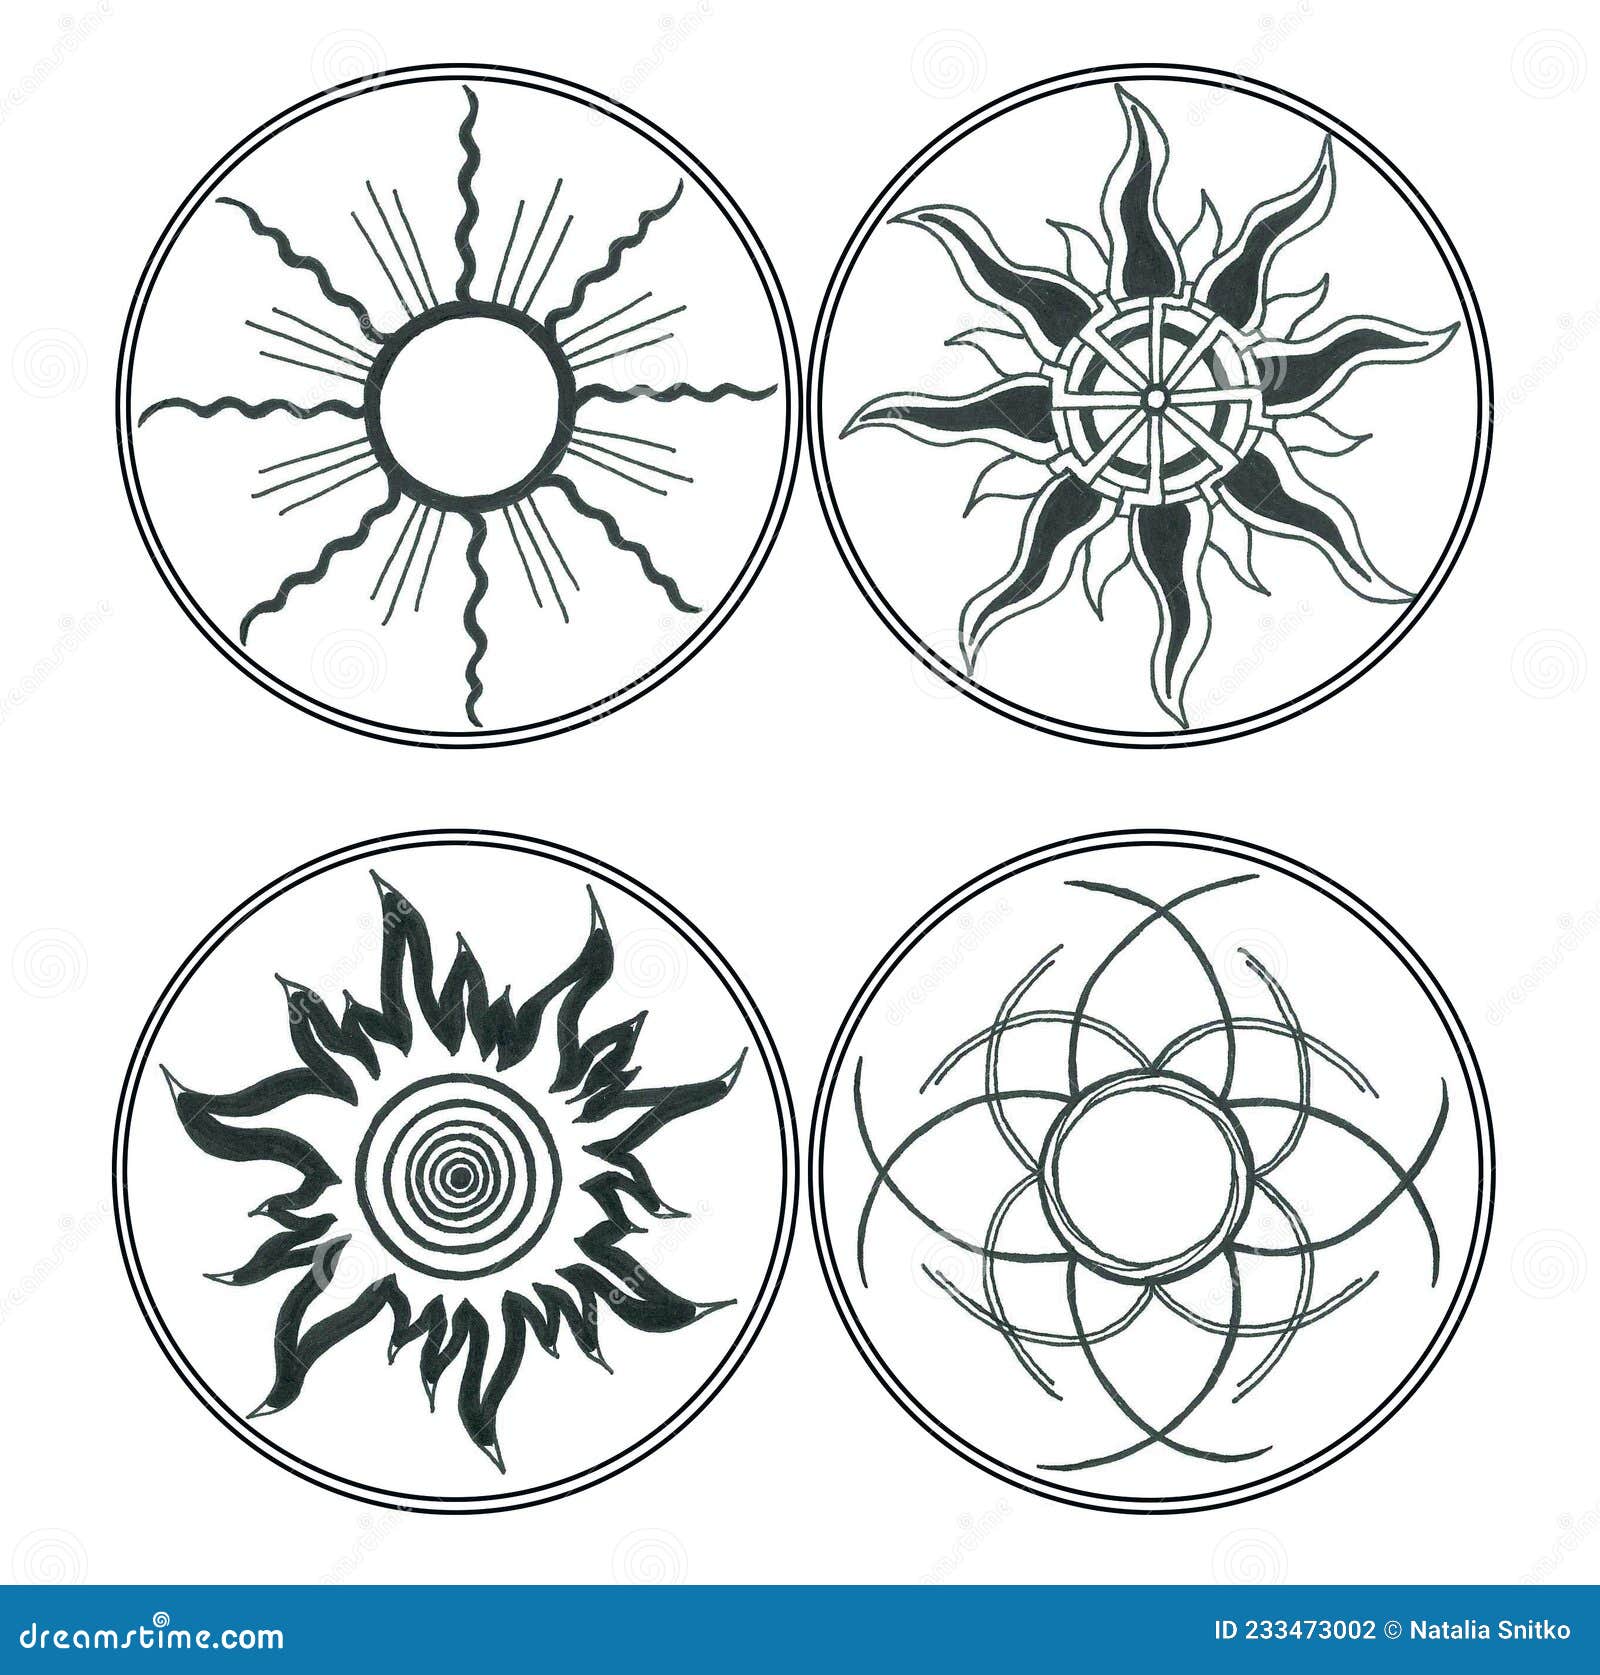 set of geometric stylized images of the sun in the circle frames